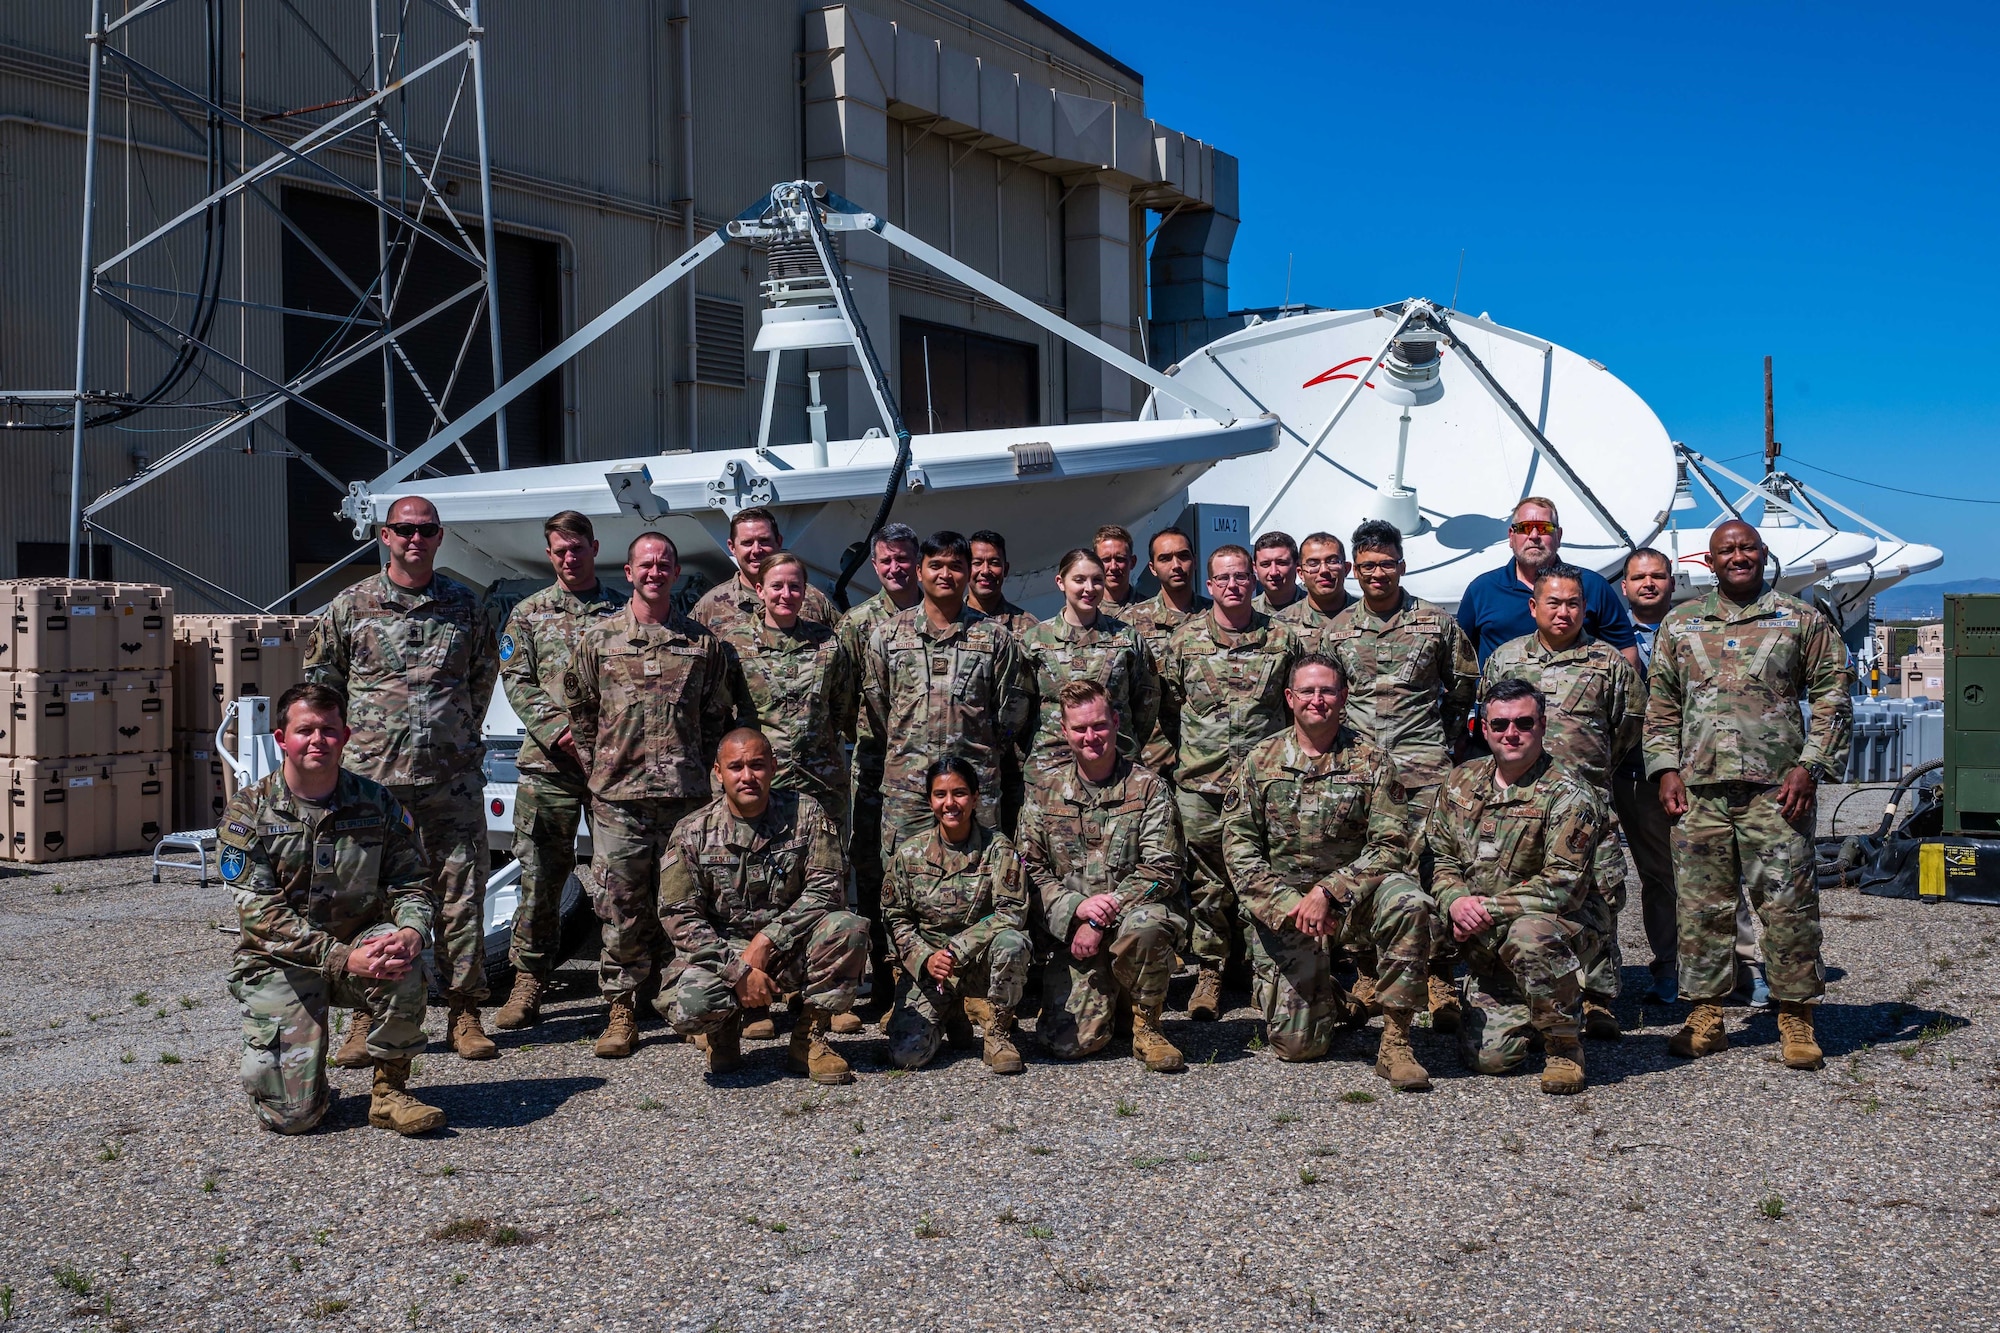 Members from the 392nd Combat Training Squadron (CTS) and the 216th Space Control Squadron (SPCS) take a group photo in front Electronic Warfare equipment during BLACK SKIES 22 at Vandenberg Space Force Base